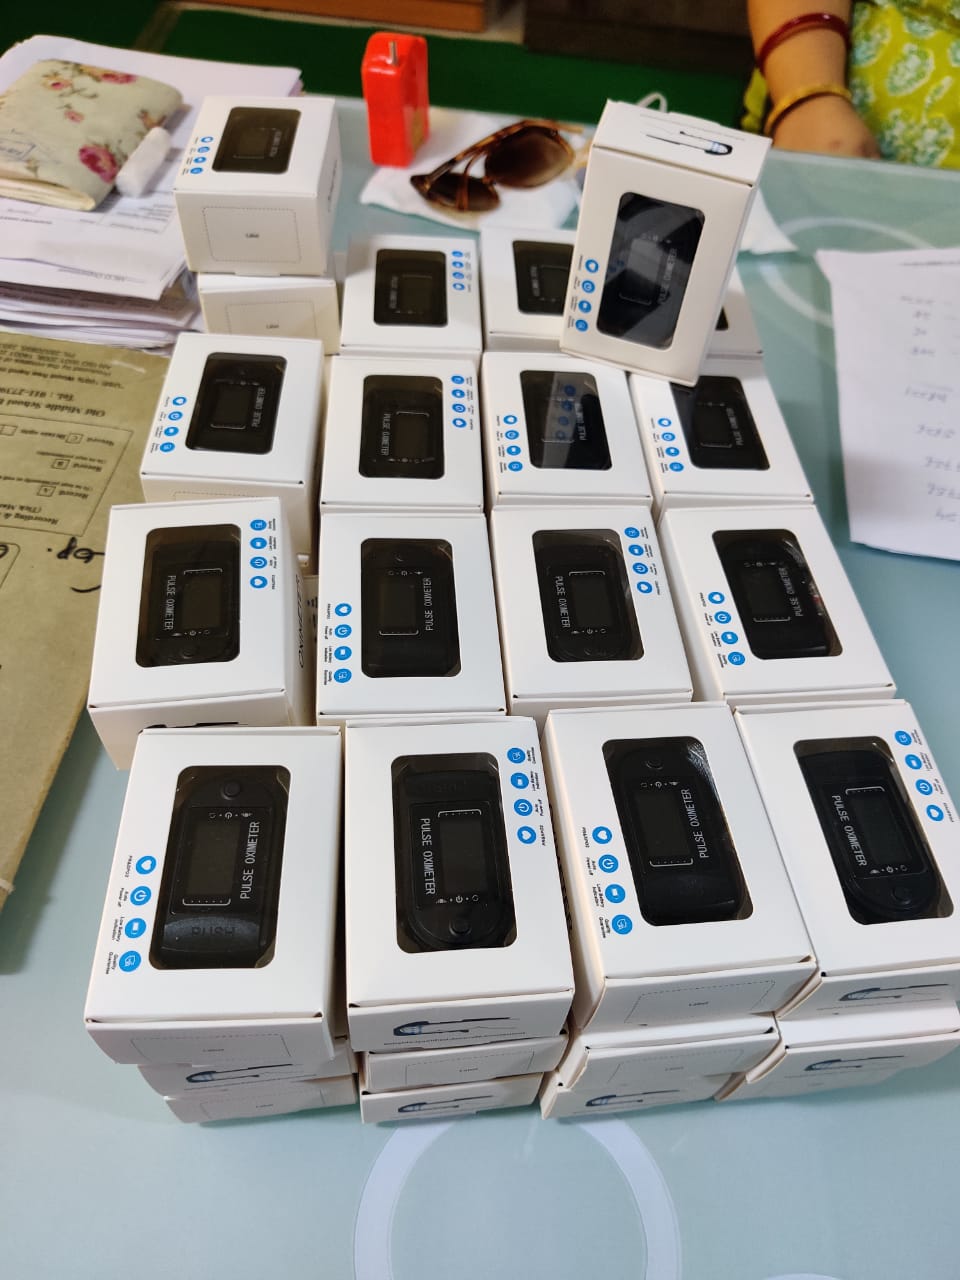 Pulse oximeters being provided to senior citizens who living in isolation